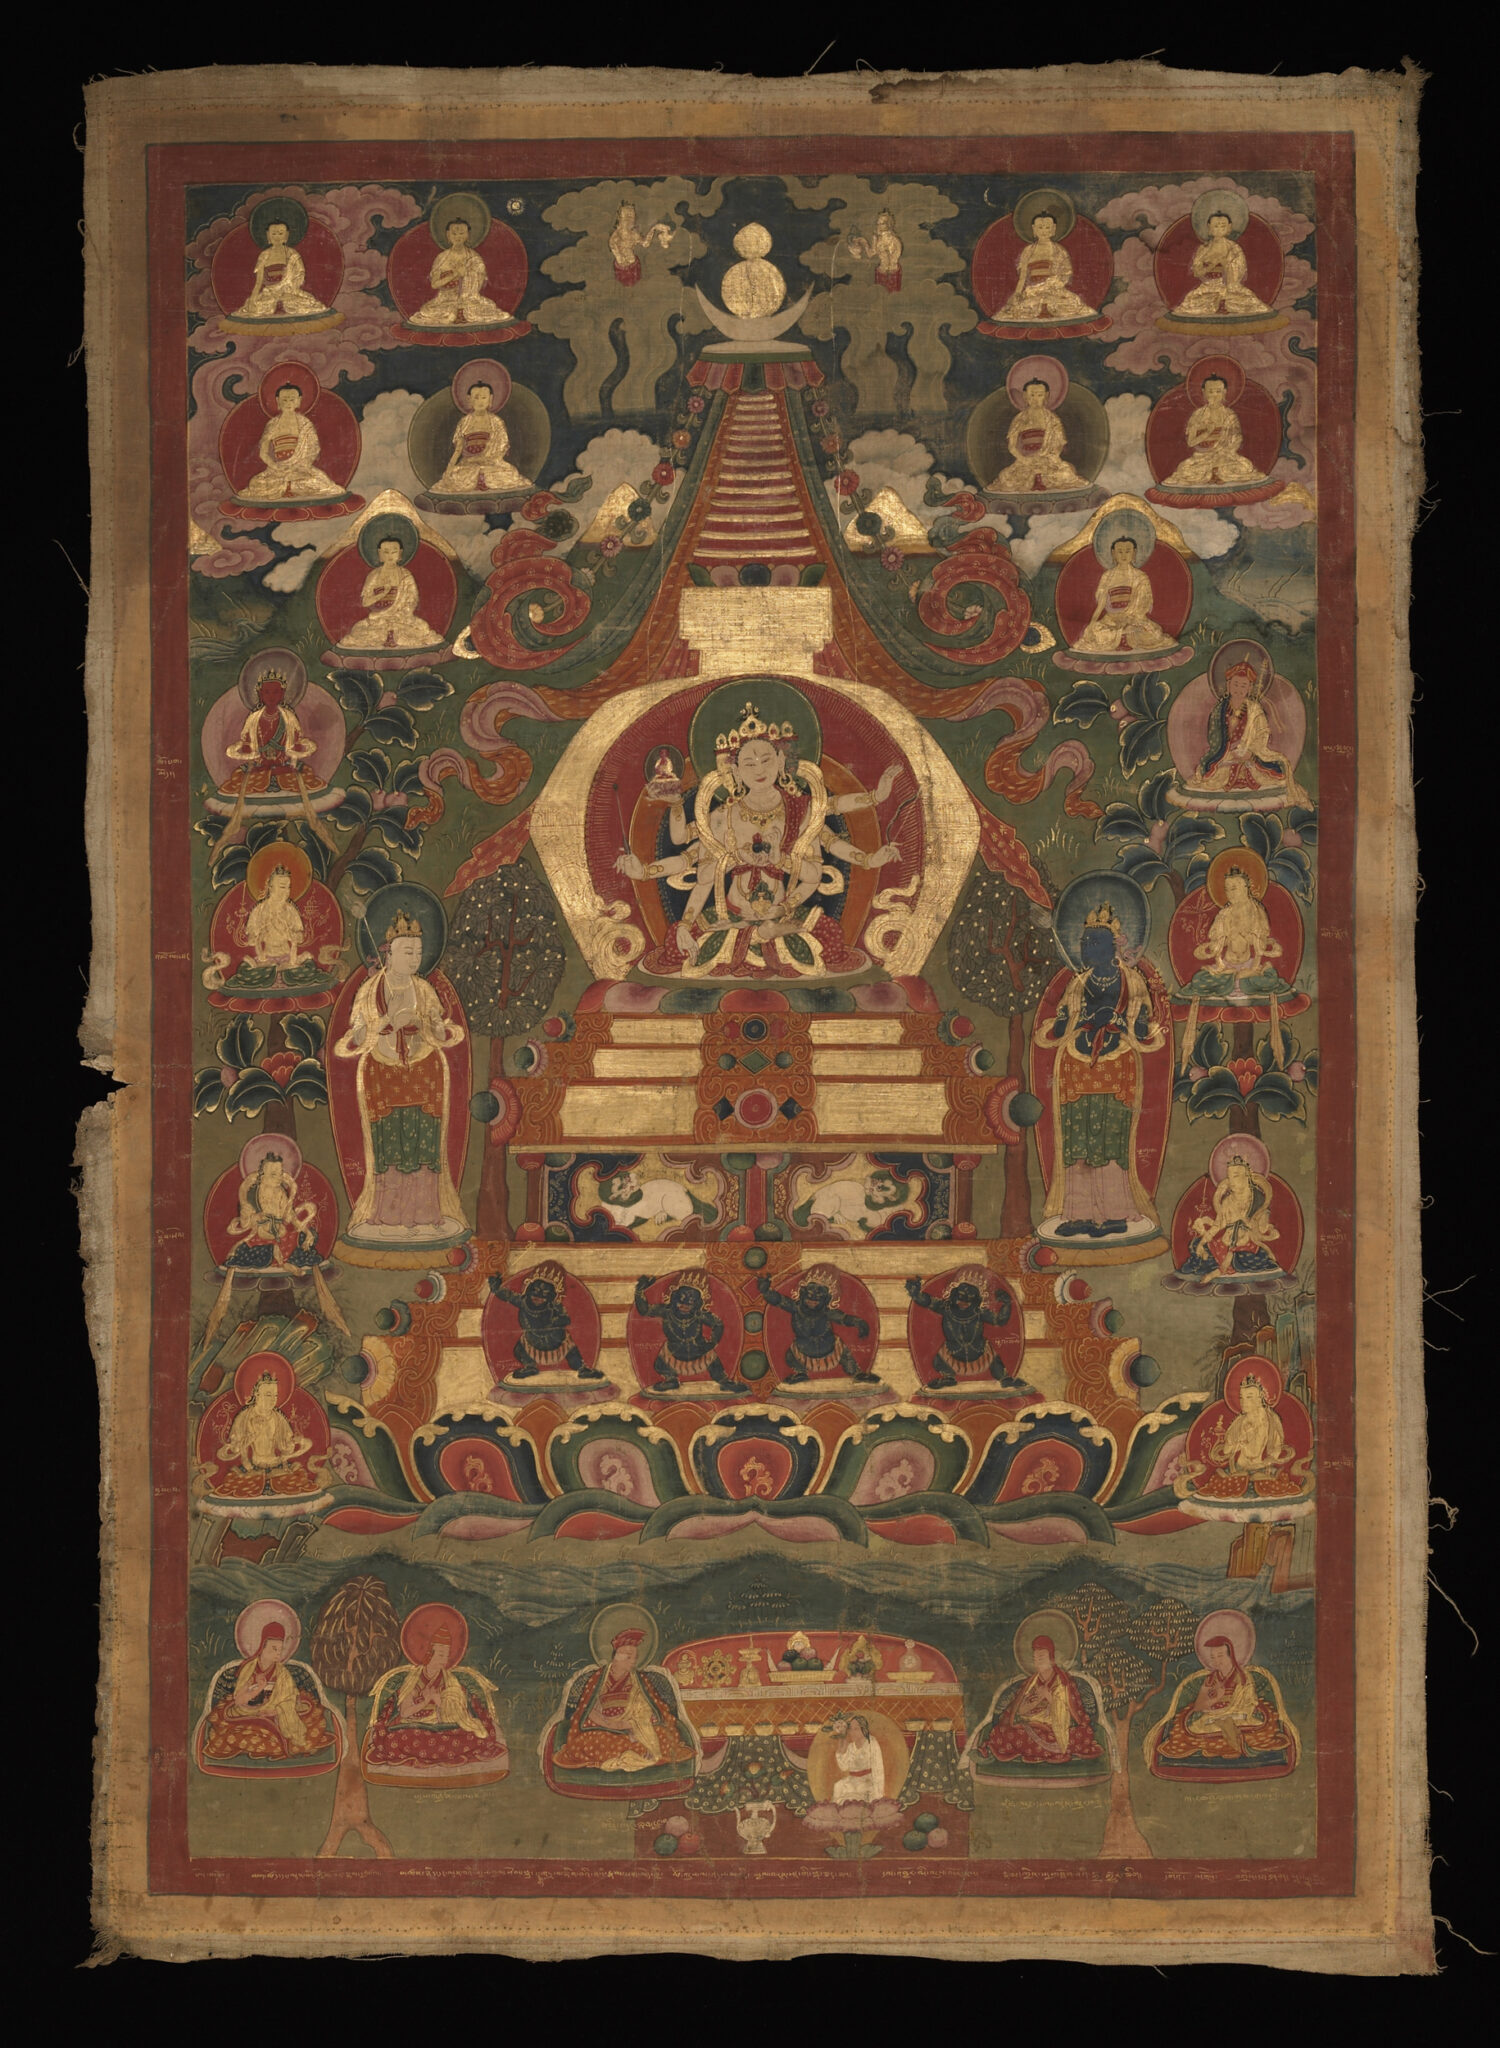 Deity at center of monumental stupa with lotus base surrounded by figures floating above verdant landscape